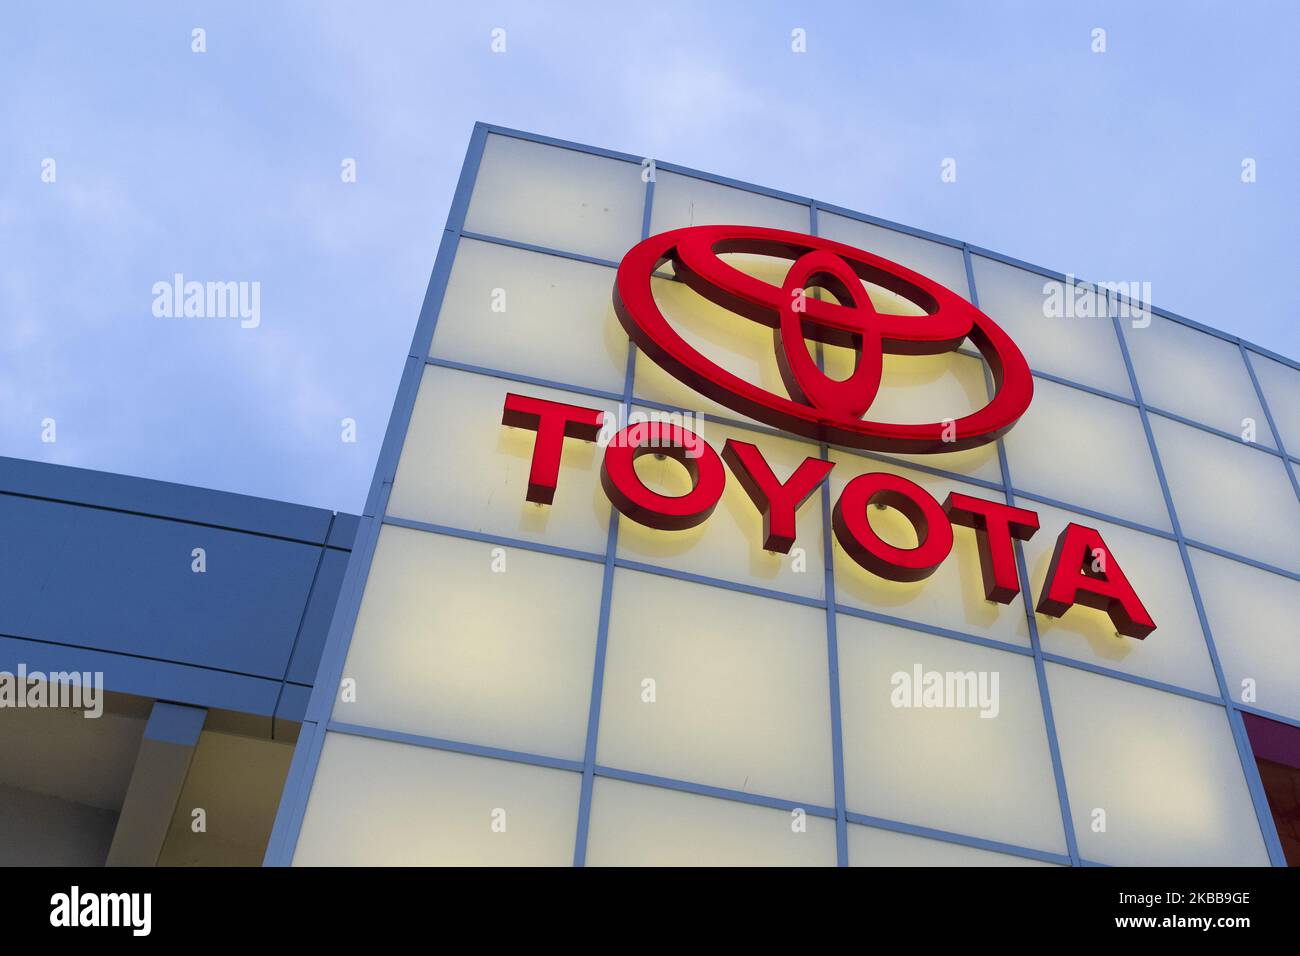 A Toyota logo is seen at a car dealership in San Jose, California, United States on Tuesday, November 19, 2019. Toyota has supported President Donald Trump's plan to bar California from setting its own vehicle emissions rules. California governor Gavin Newsom said on Monday it will halt all purchases of new vehicles for state government fleets from GM, Toyota and Fiat Chrysler. (Photo by Yichuan Cao/NurPhoto) Stock Photo